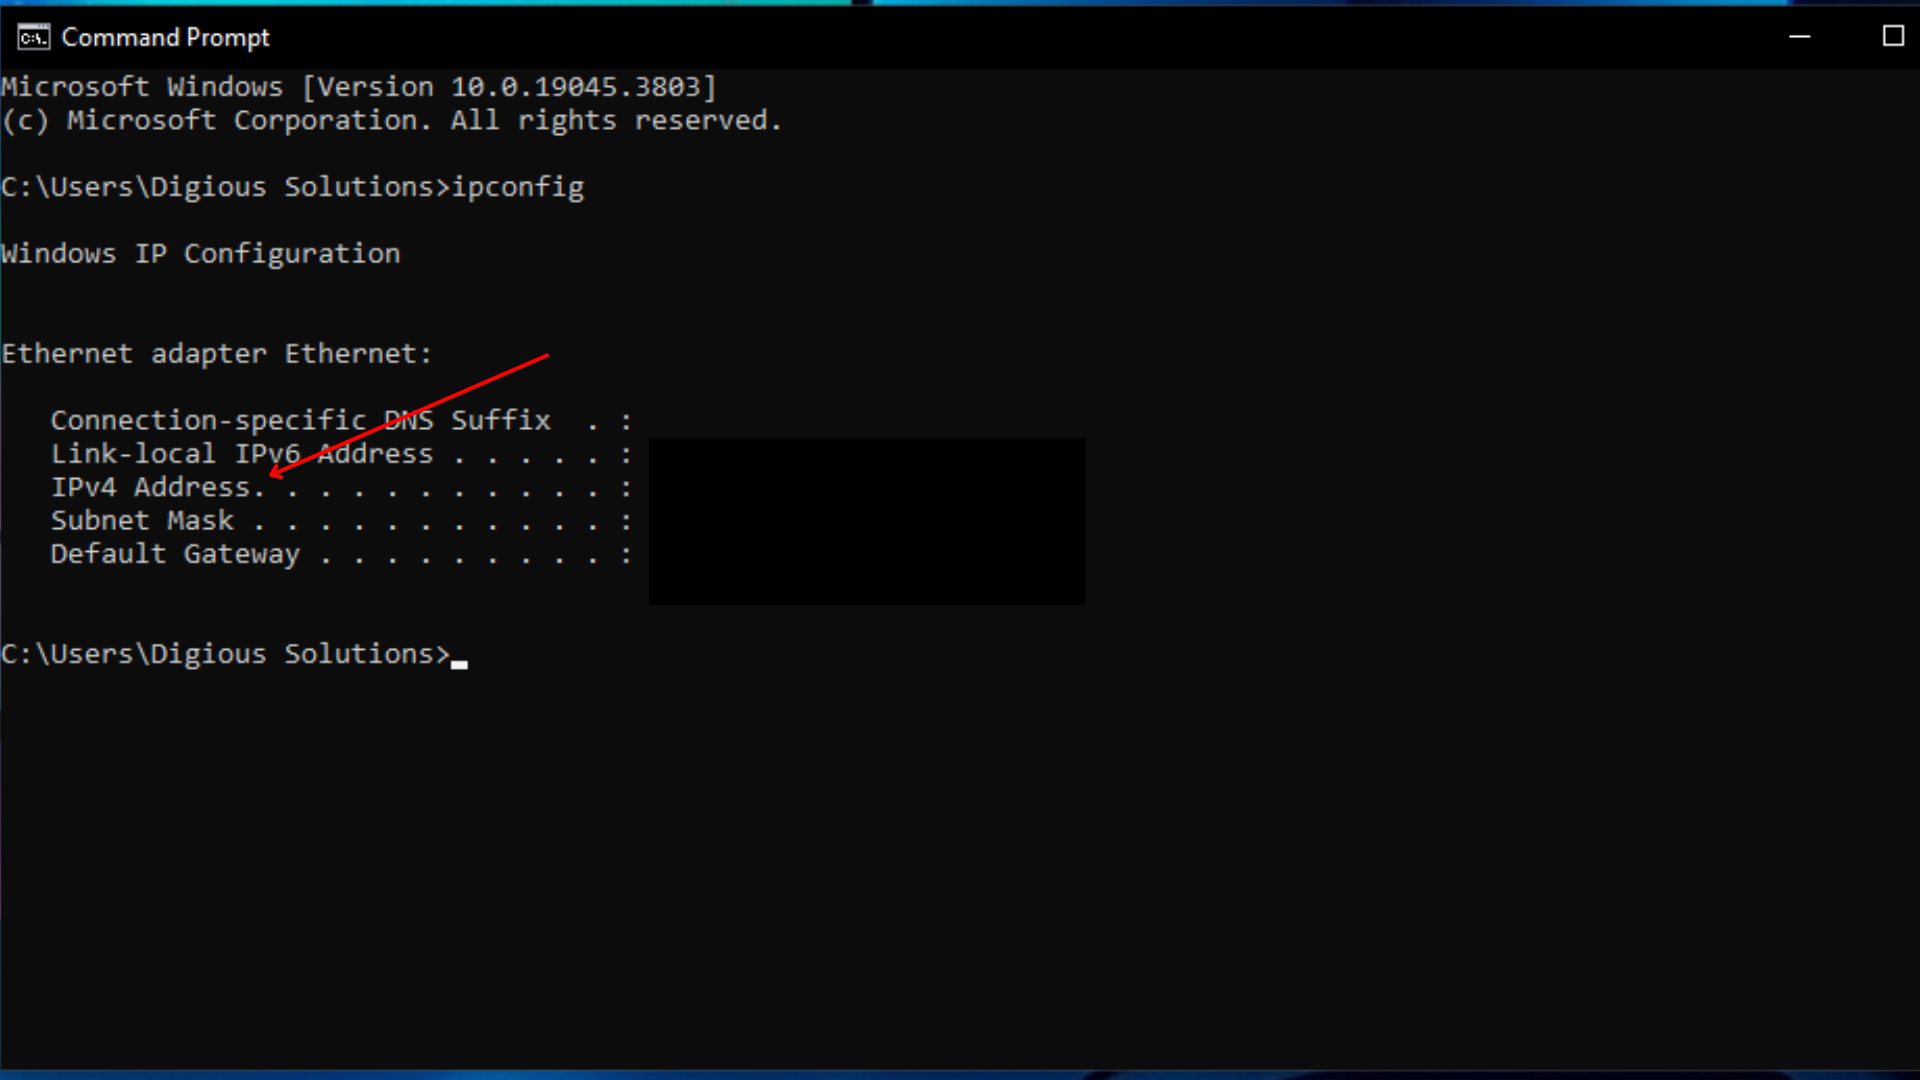 The image shows a Windows Command Prompt window